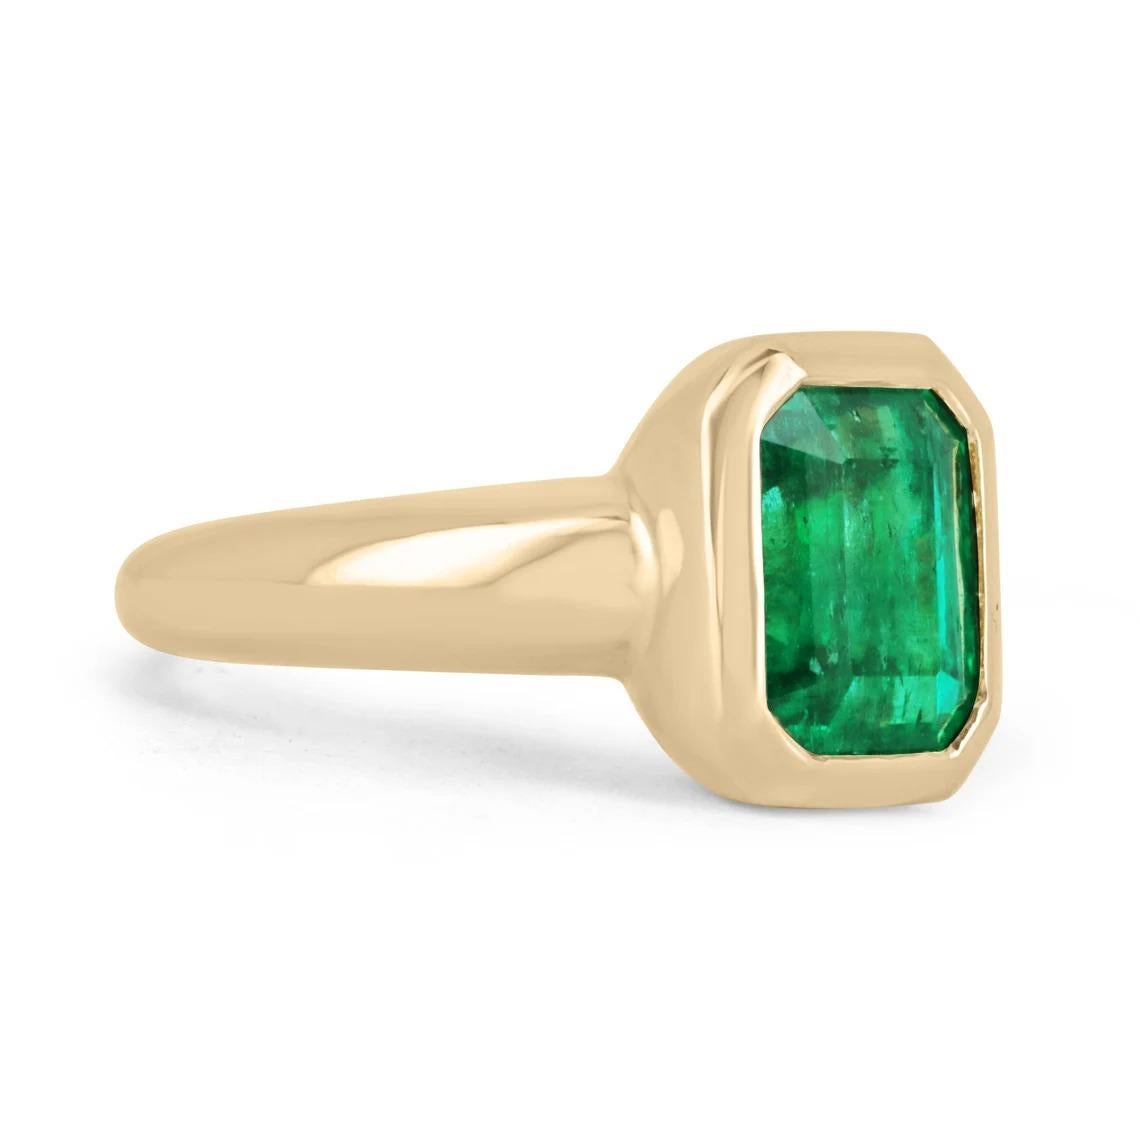 A remarkable, AAA+ emerald solitaire engagement ring. A 3.92-carat, natural emerald cut Colombian emerald with superb qualities. This extremely rare fine gemstone is considered the top 1% of gem production in the global emerald market. A gemstone so